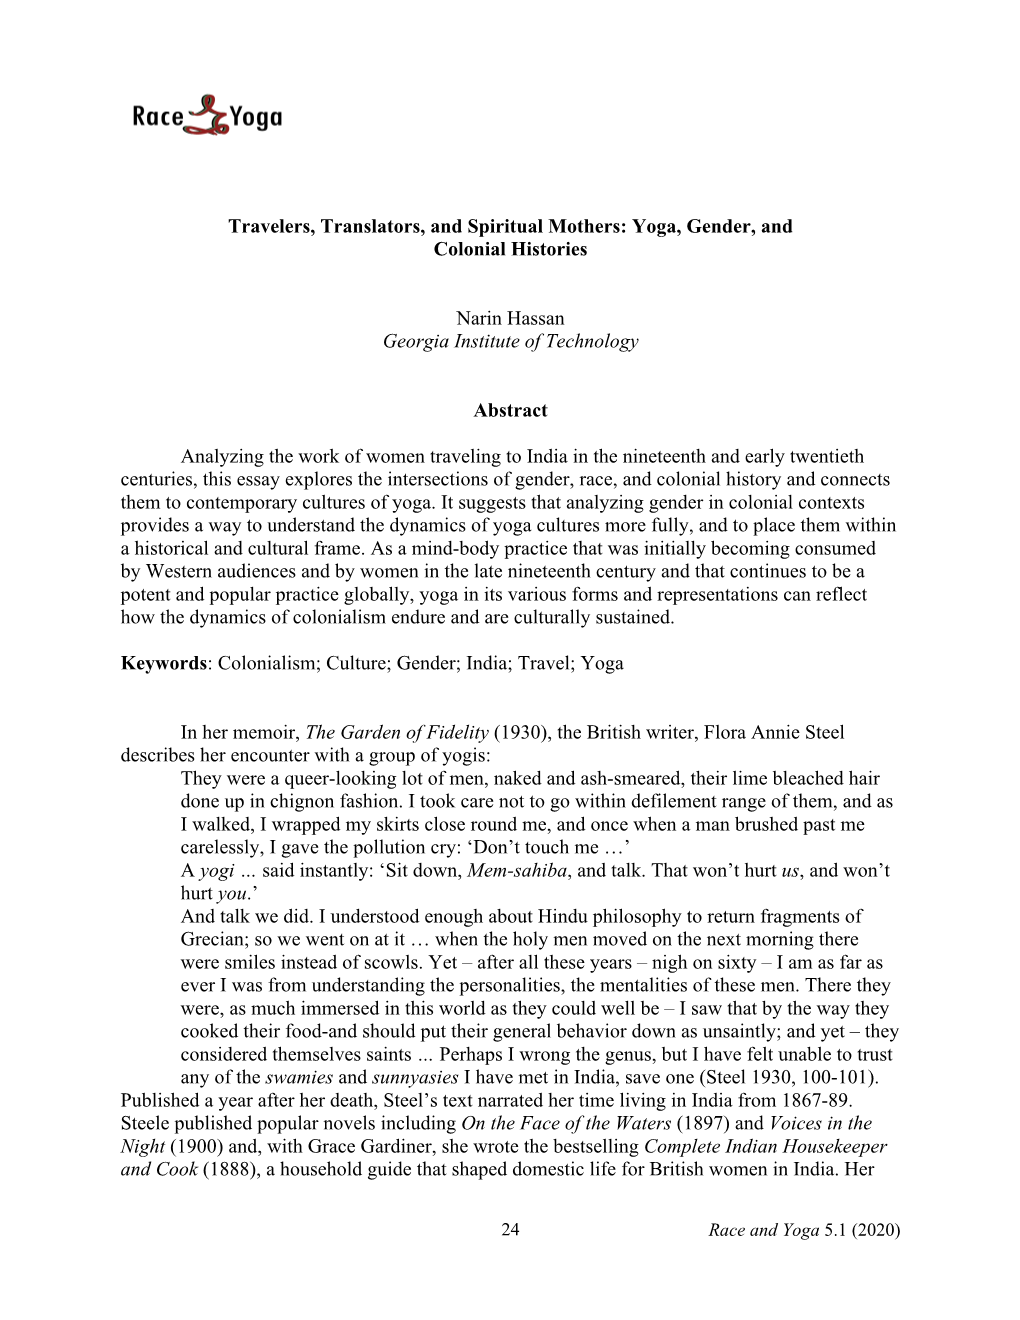 Travelers, Translators, and Spiritual Mothers: Yoga, Gender, and Colonial Histories